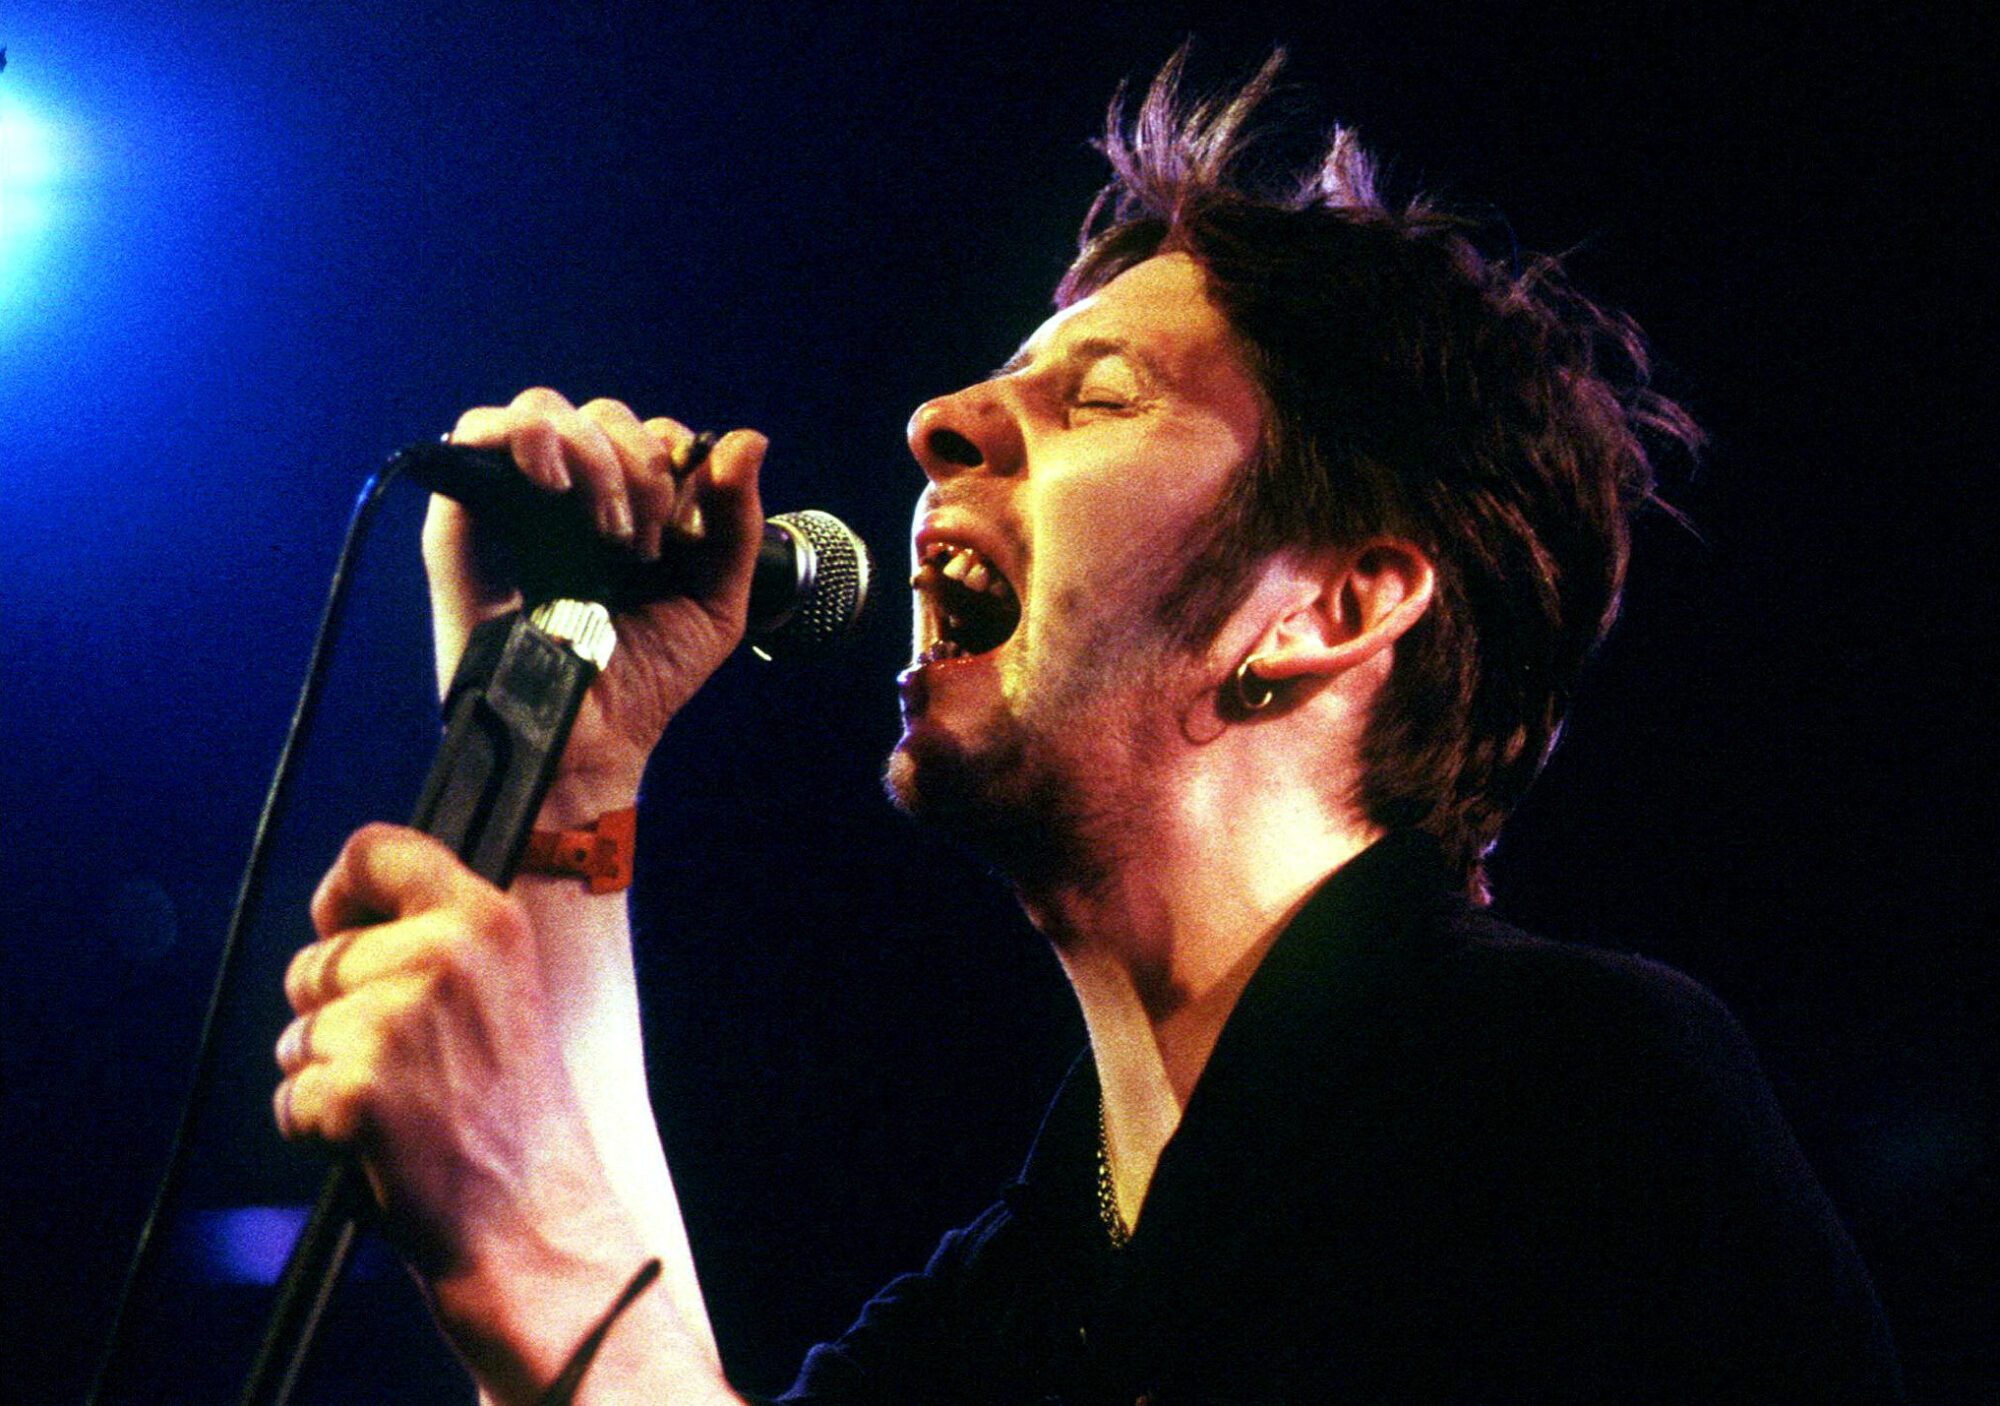 FILE PHOTO: Shane MacGowan, former lead singer of The Pogues, performs during the Montreux Jazz festival in the [Miles Davis] Hall late July 15, 1995. MacGowan and his band The Popes were part of the 'Irish Night' during the festival. REUTERS/Stringer/File Photo